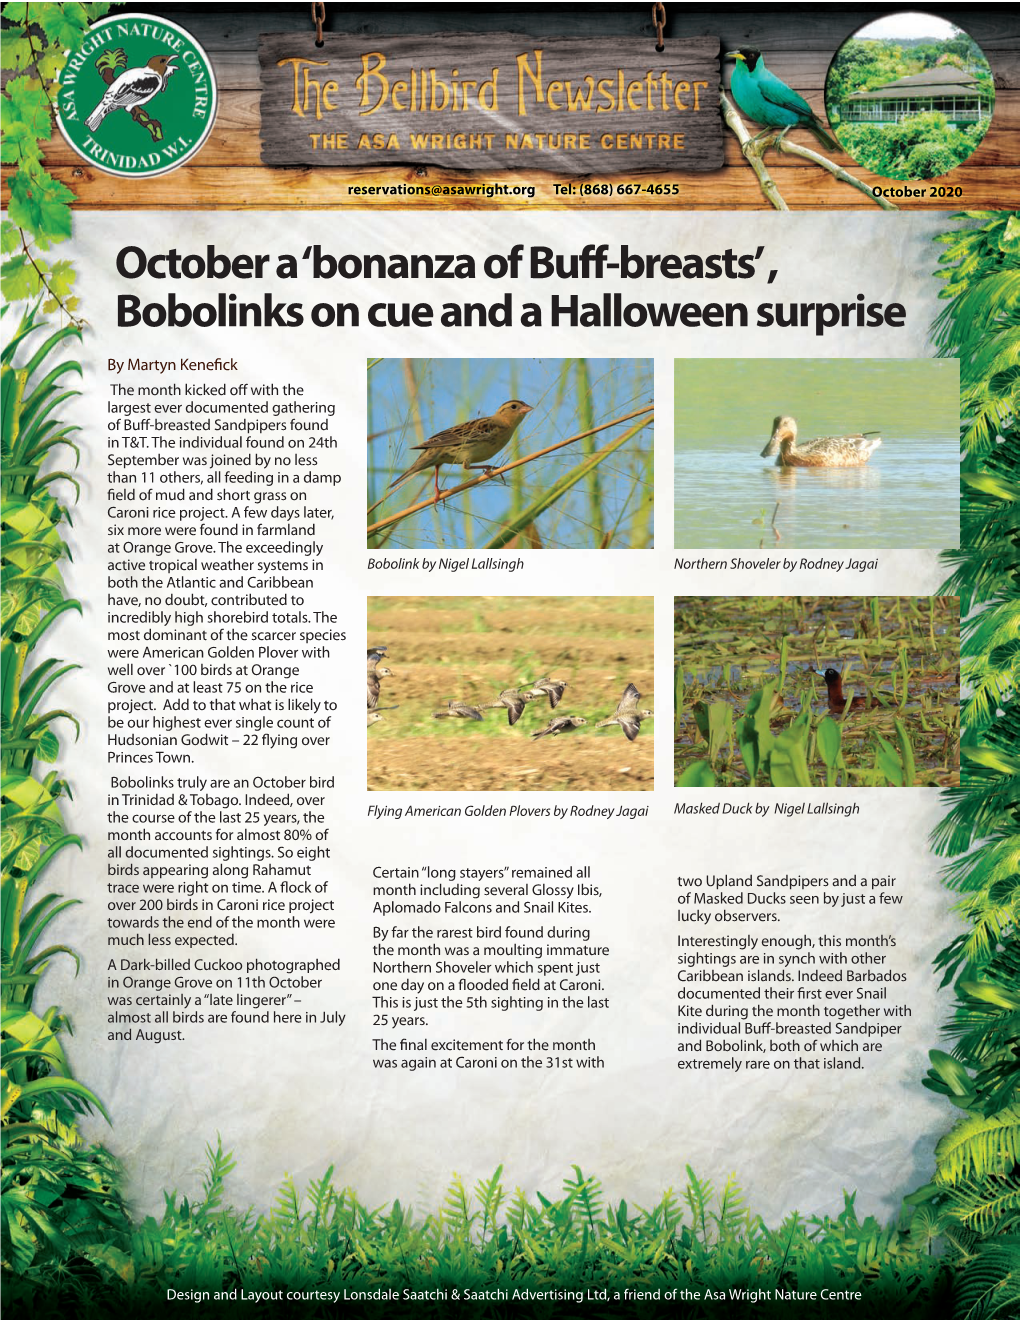 October 2020 October a ‘Bonanza of Buff-Breasts’ , Bobolinks on Cue and a Halloween Surprise